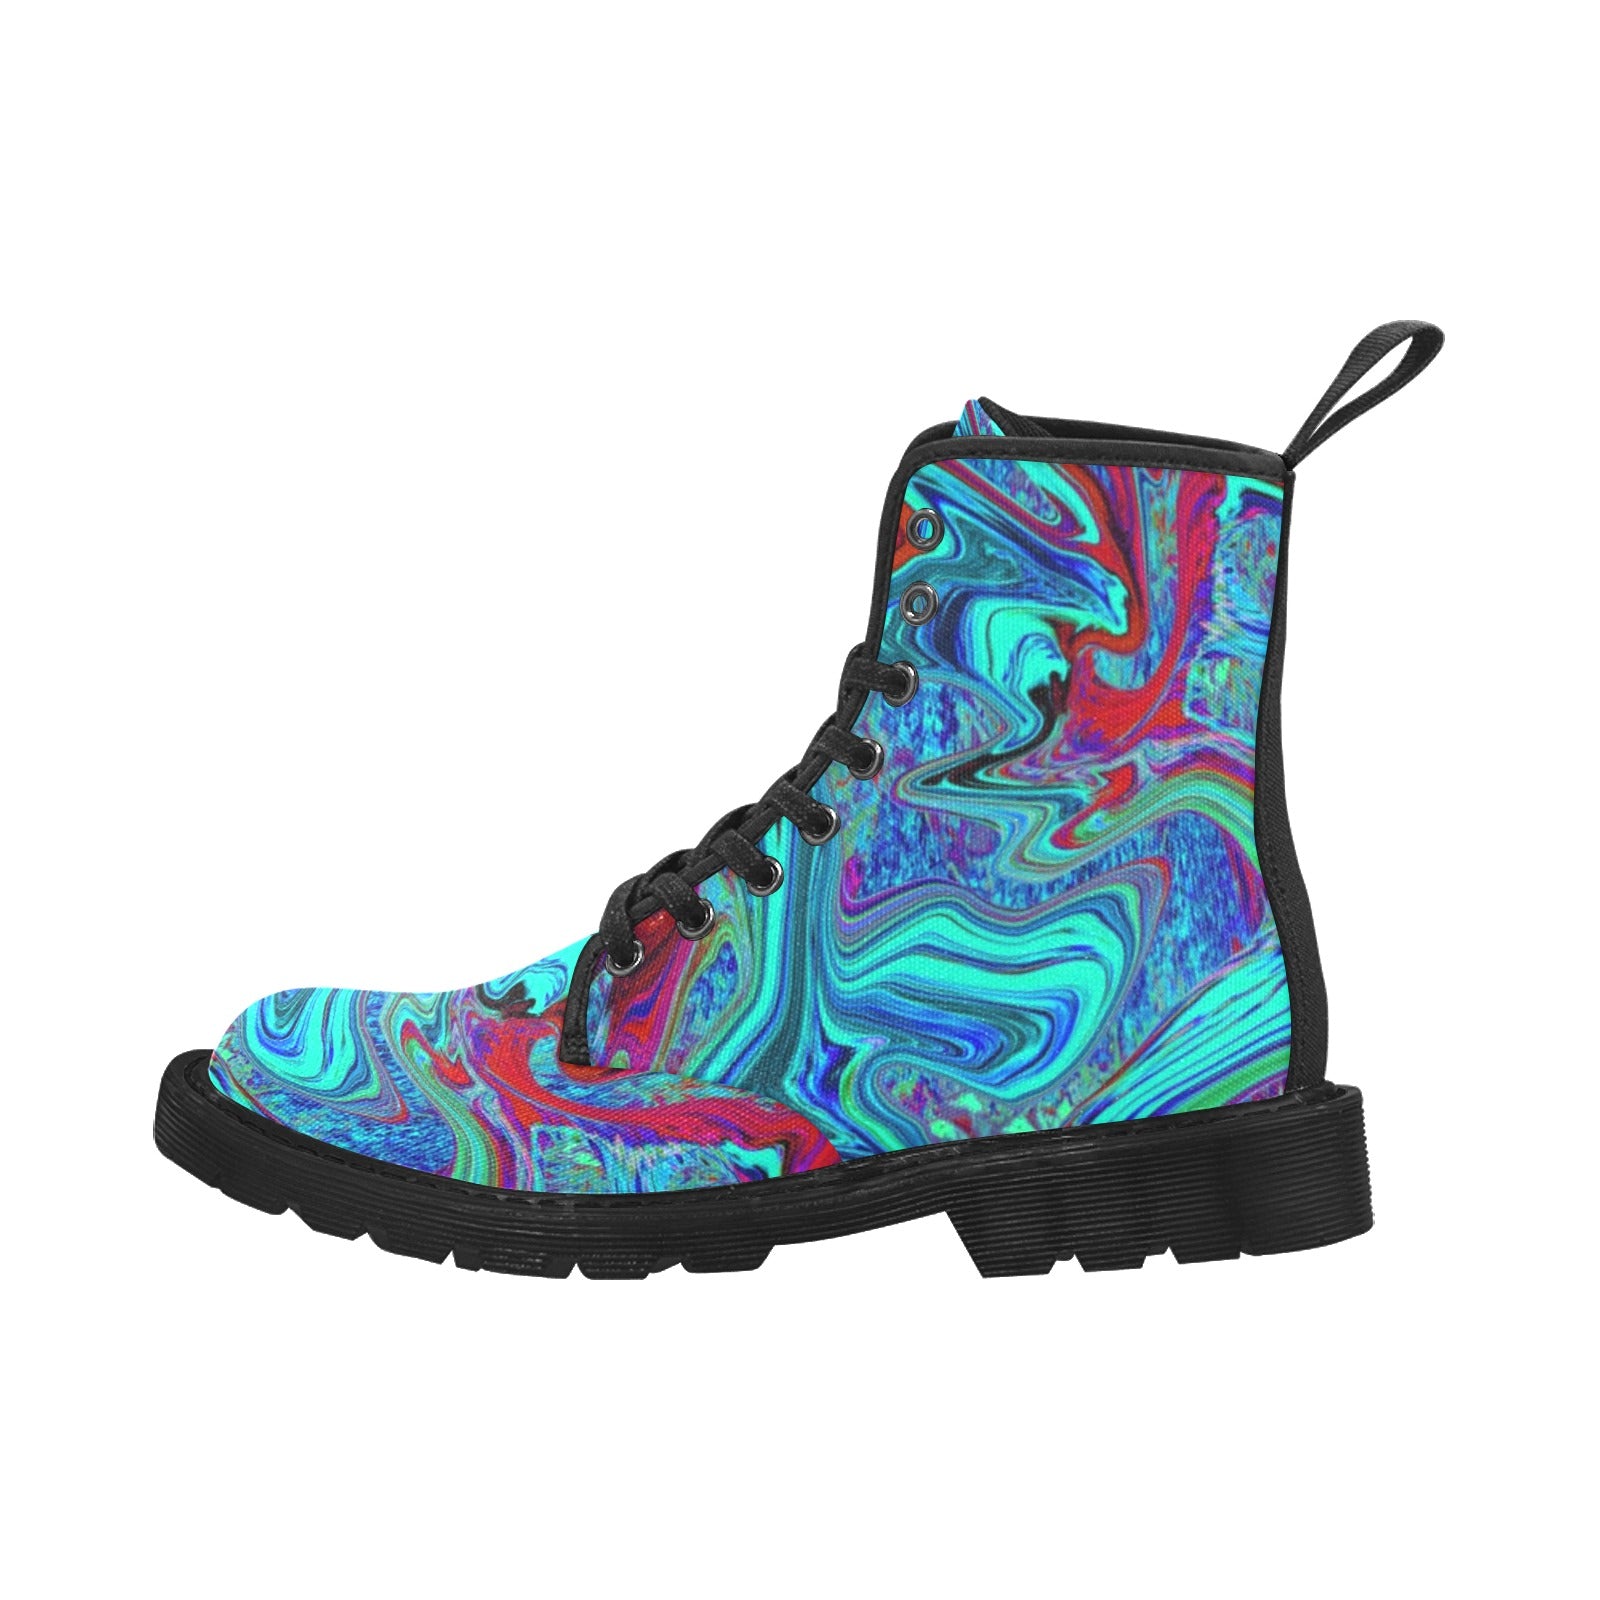 Boots for Women, Groovy Abstract Retro Art in Blue and Red - Black